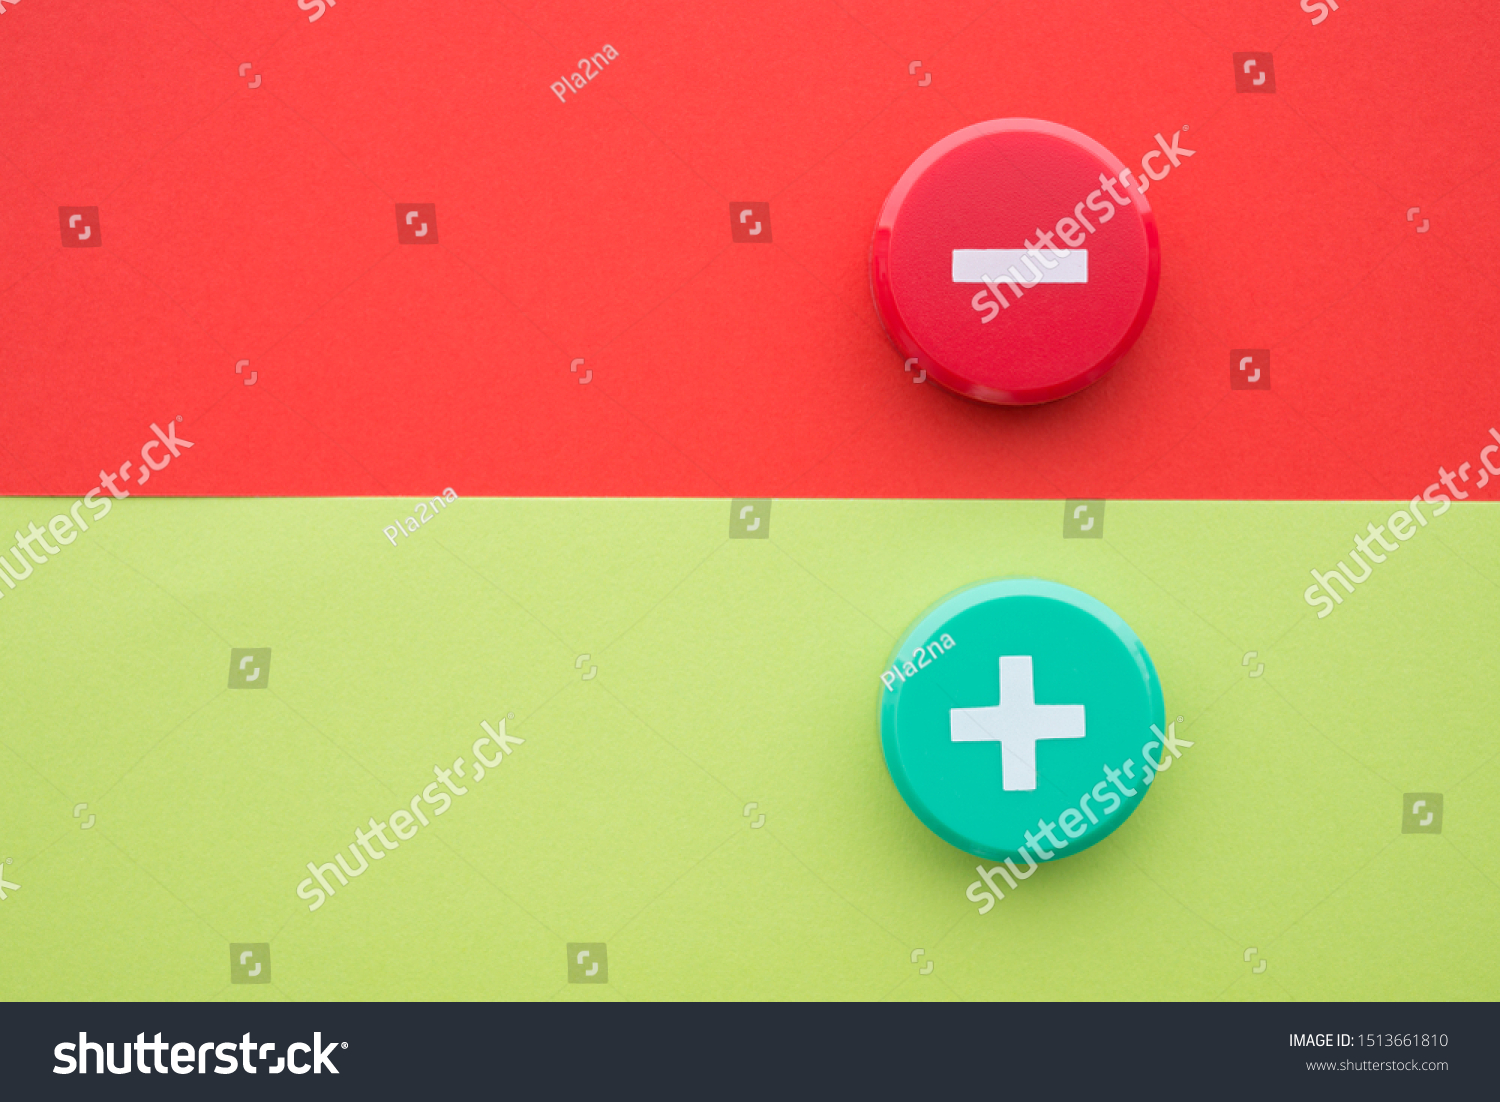 Flat lay of green plus and red minus symbol plastic botton on green and red background with copy space. Concept of difference, opposites plus vs minus or pros vs cons. #1513661810